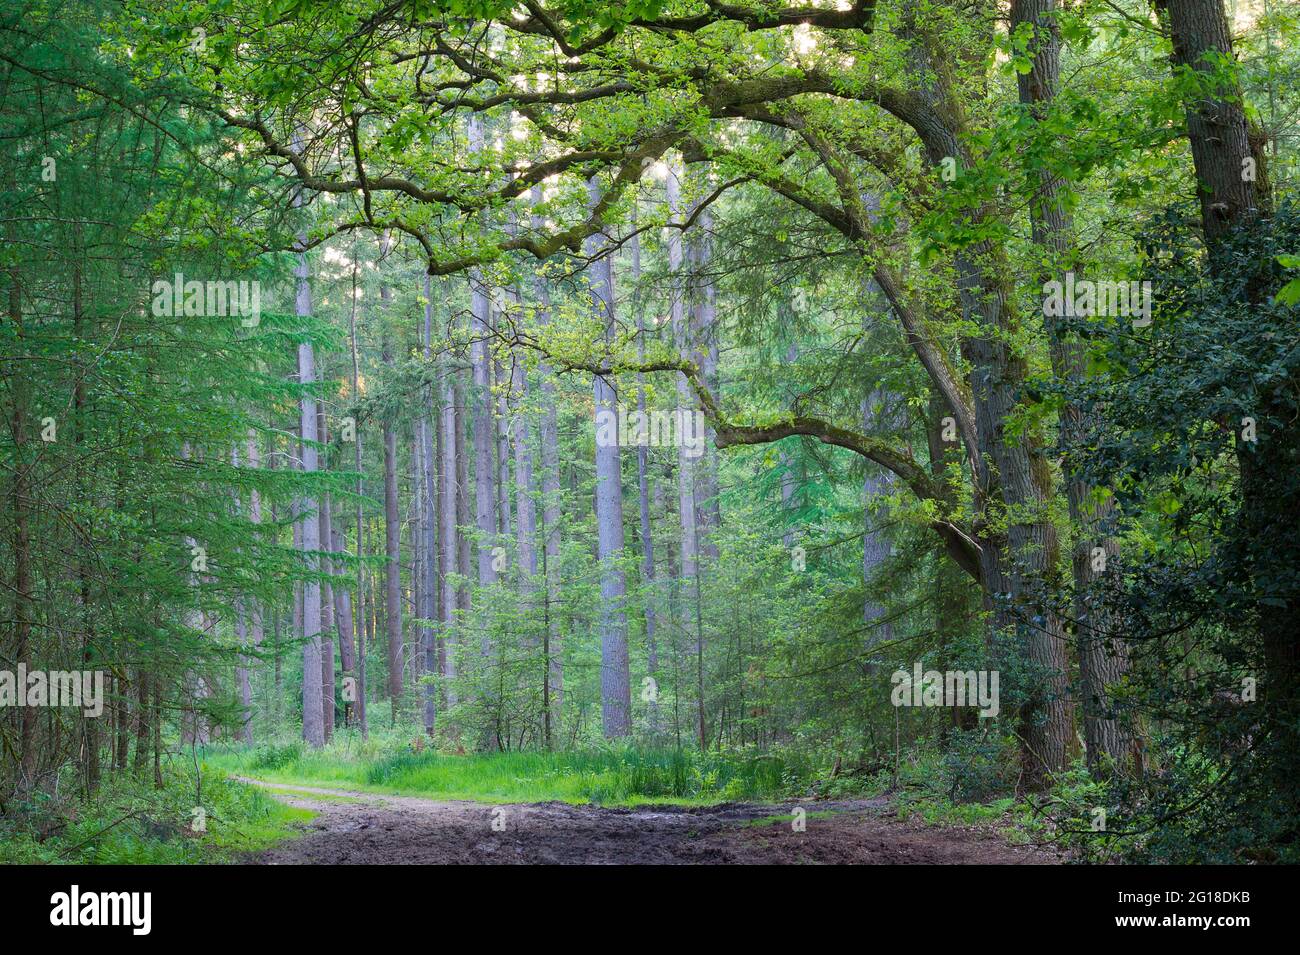 Forest view with gnarly oak trees Stock Photo